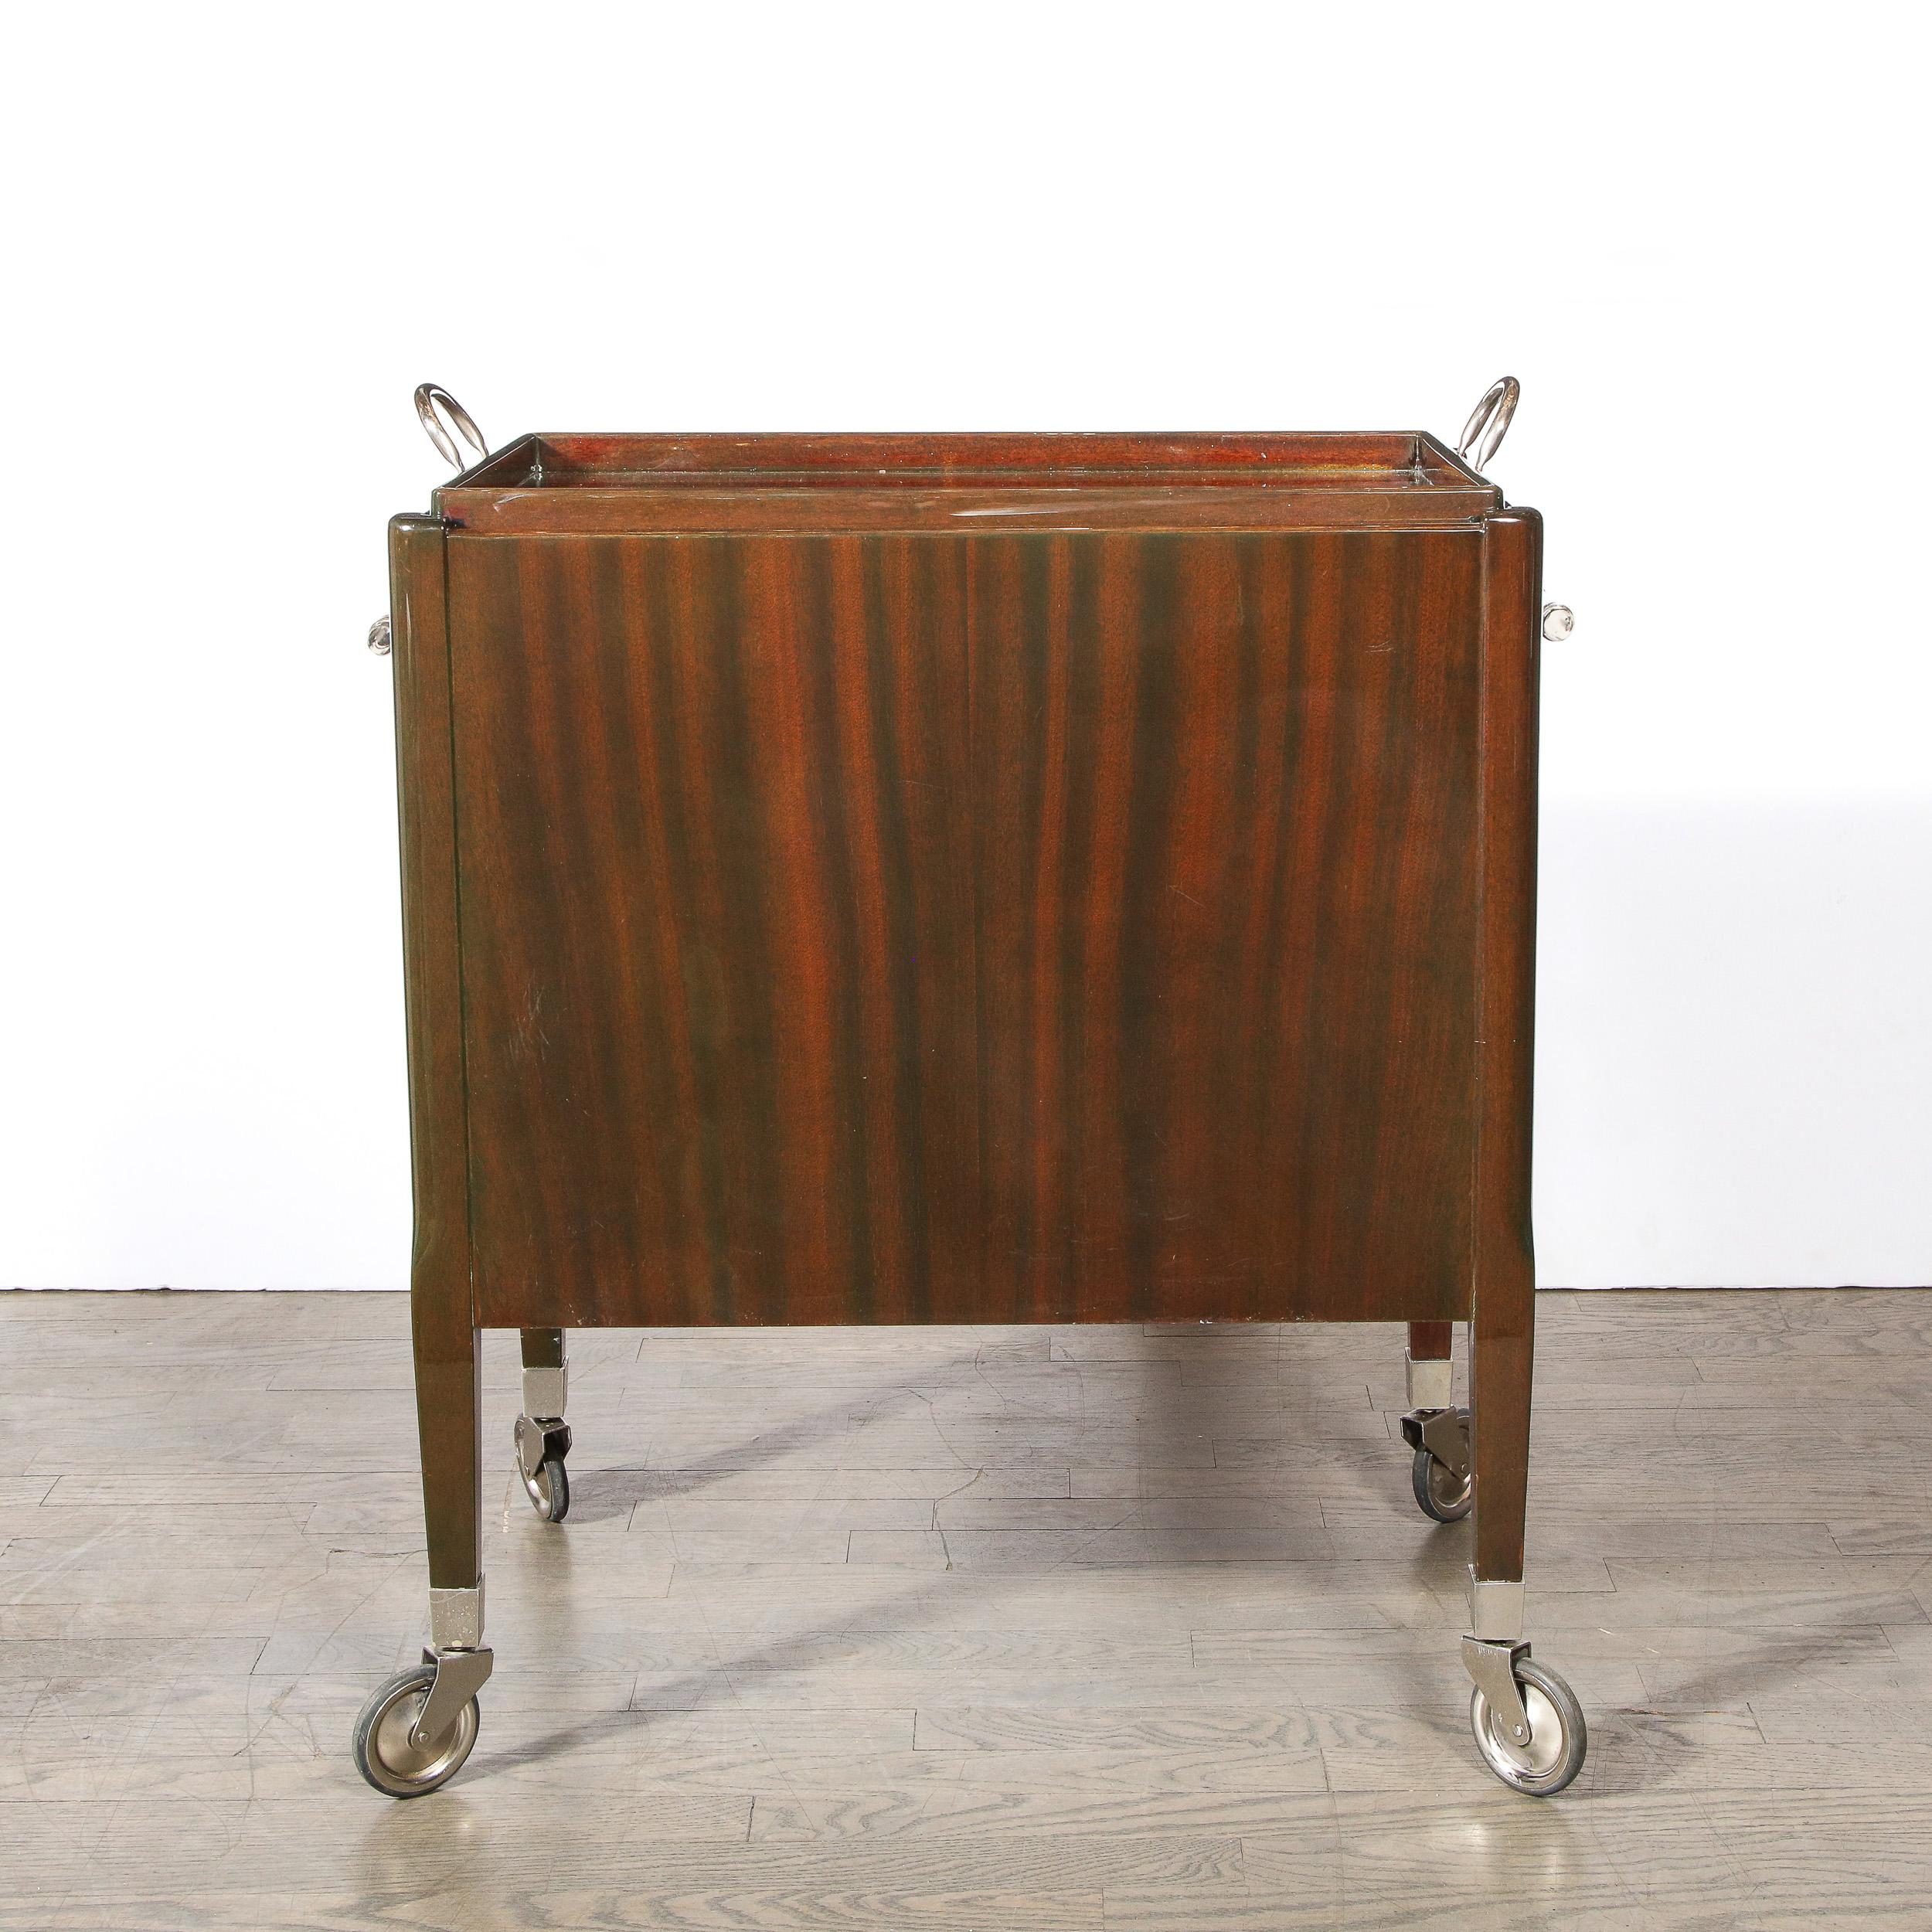 Art Deco Bookmatched Walnut Bar Cart with Nickeled Details & Removable Tray 2